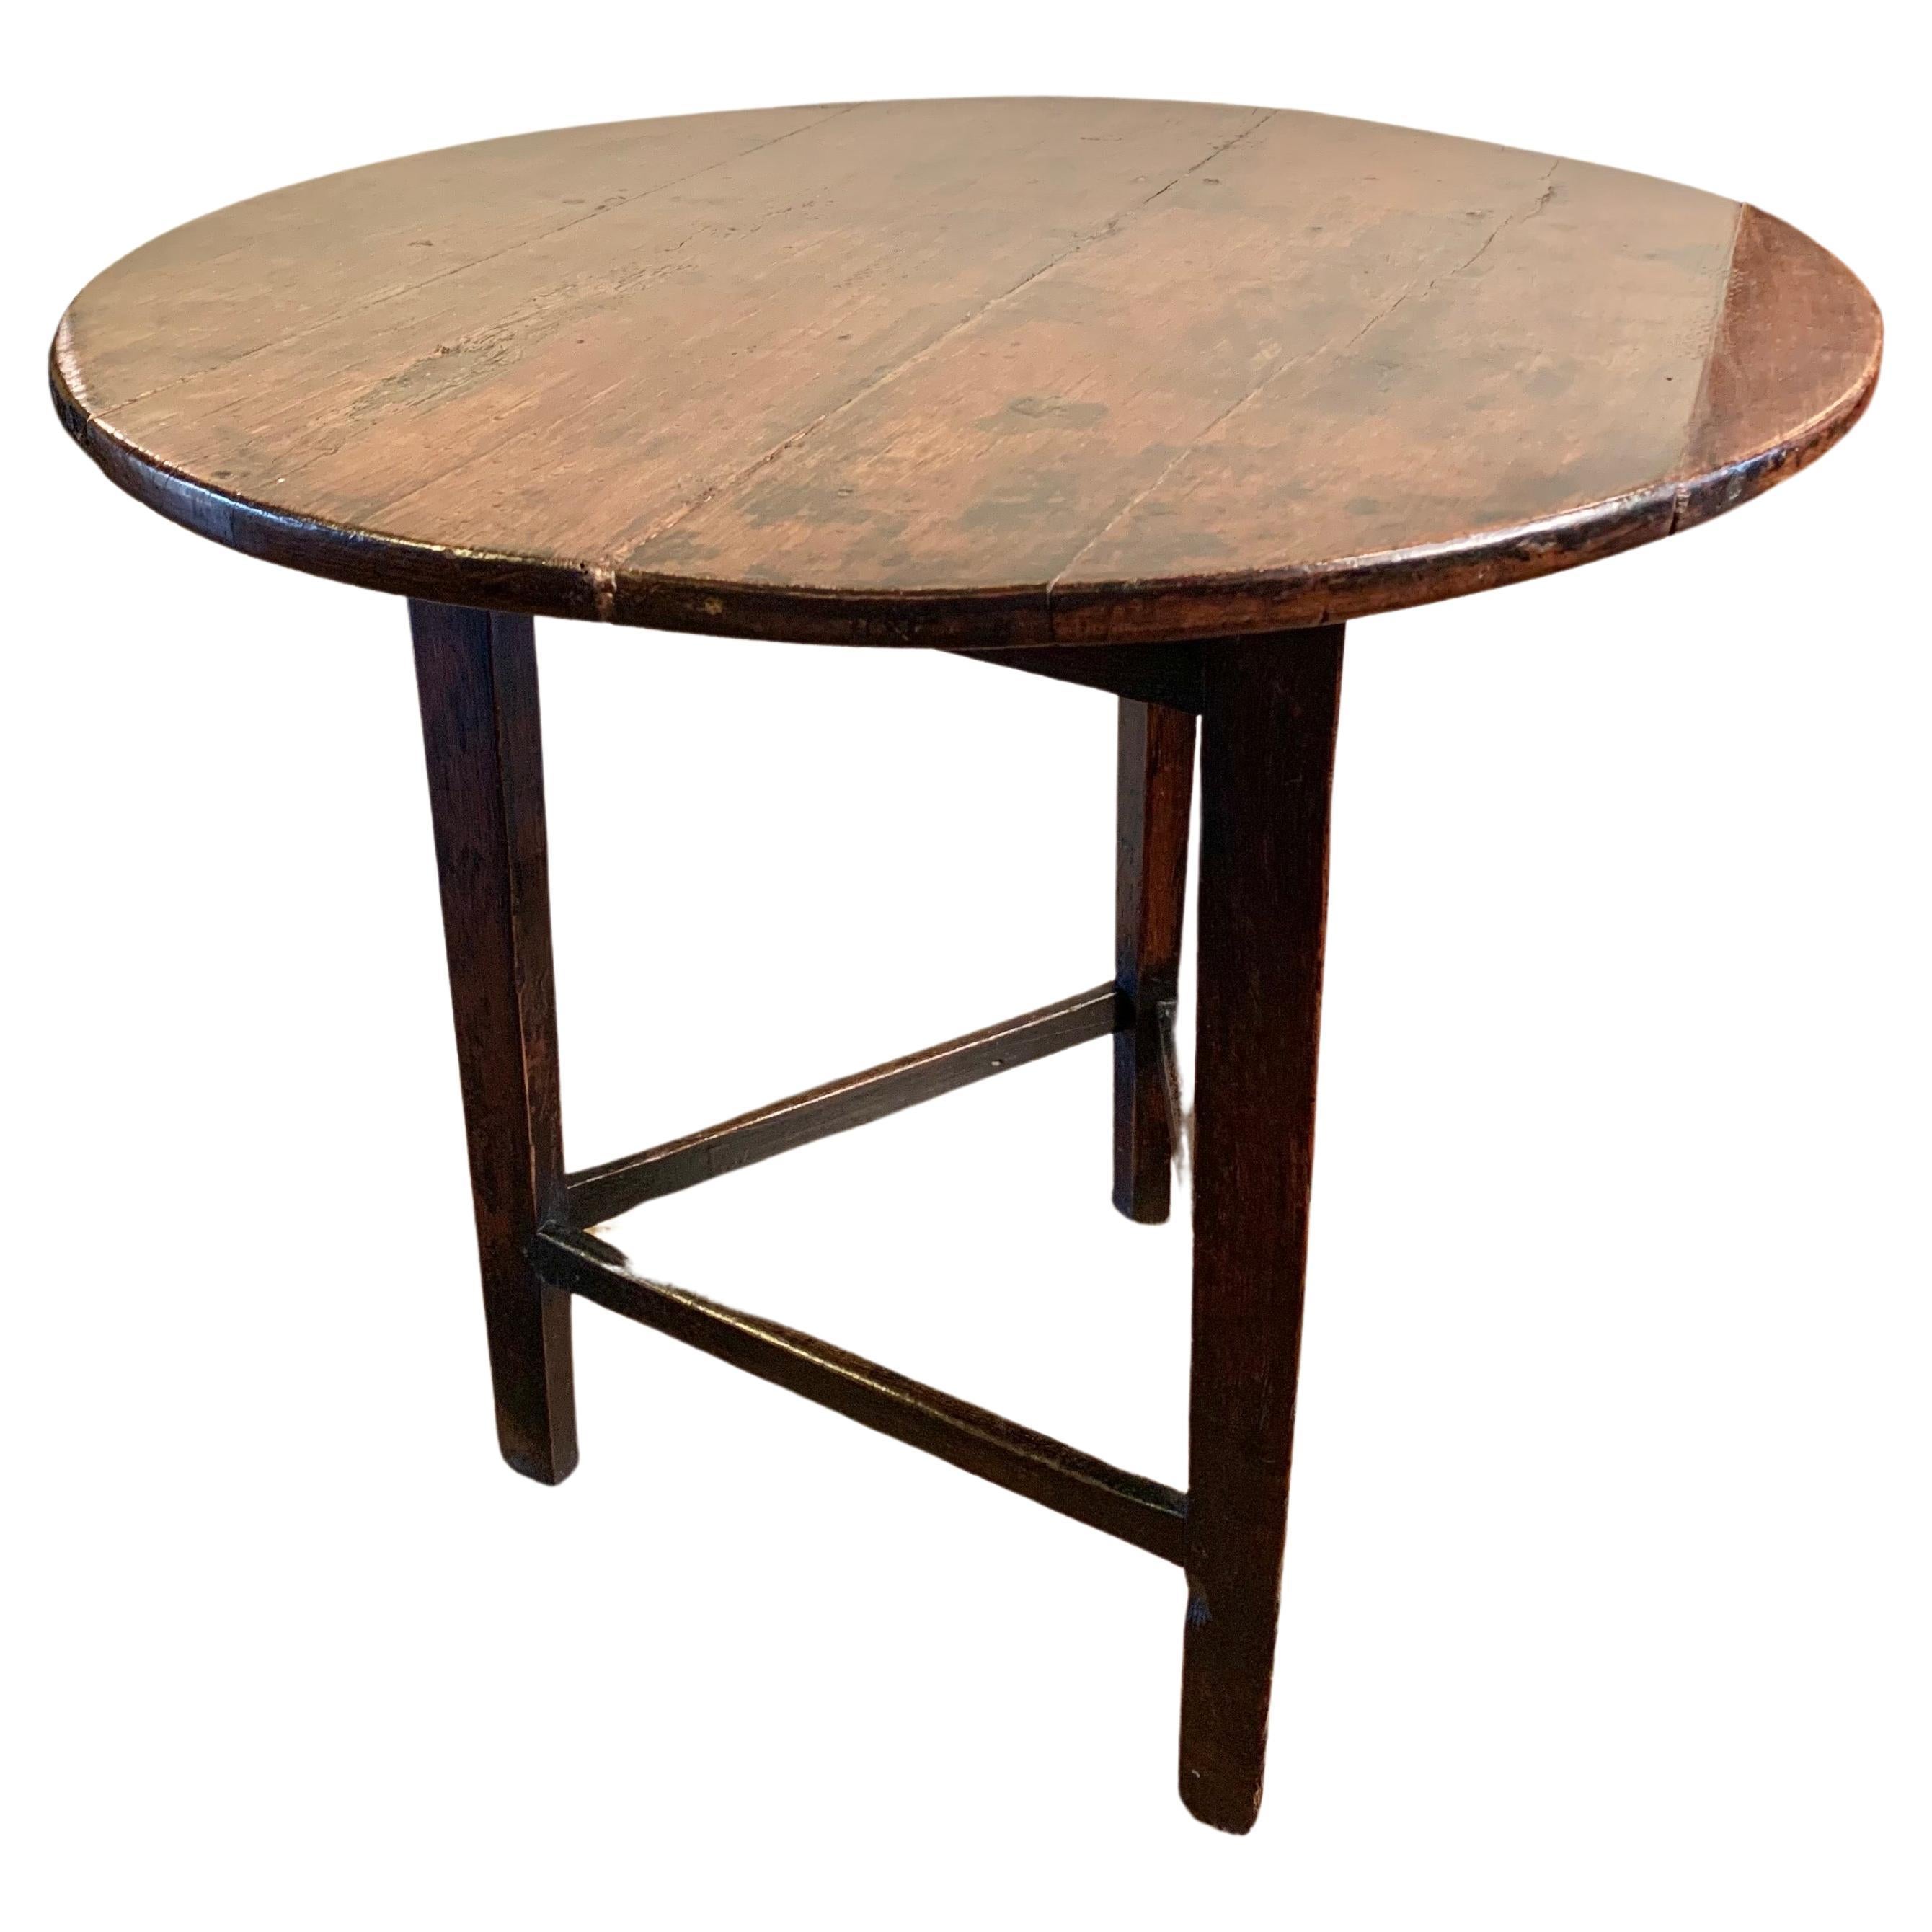 This English Cricket Table was crafted in the late 1800's from old growth walnut. The piece features a circular top resting on three legs that have been adjoined with triangular stretchers. Cricket tables are in essence English pieces of furniture